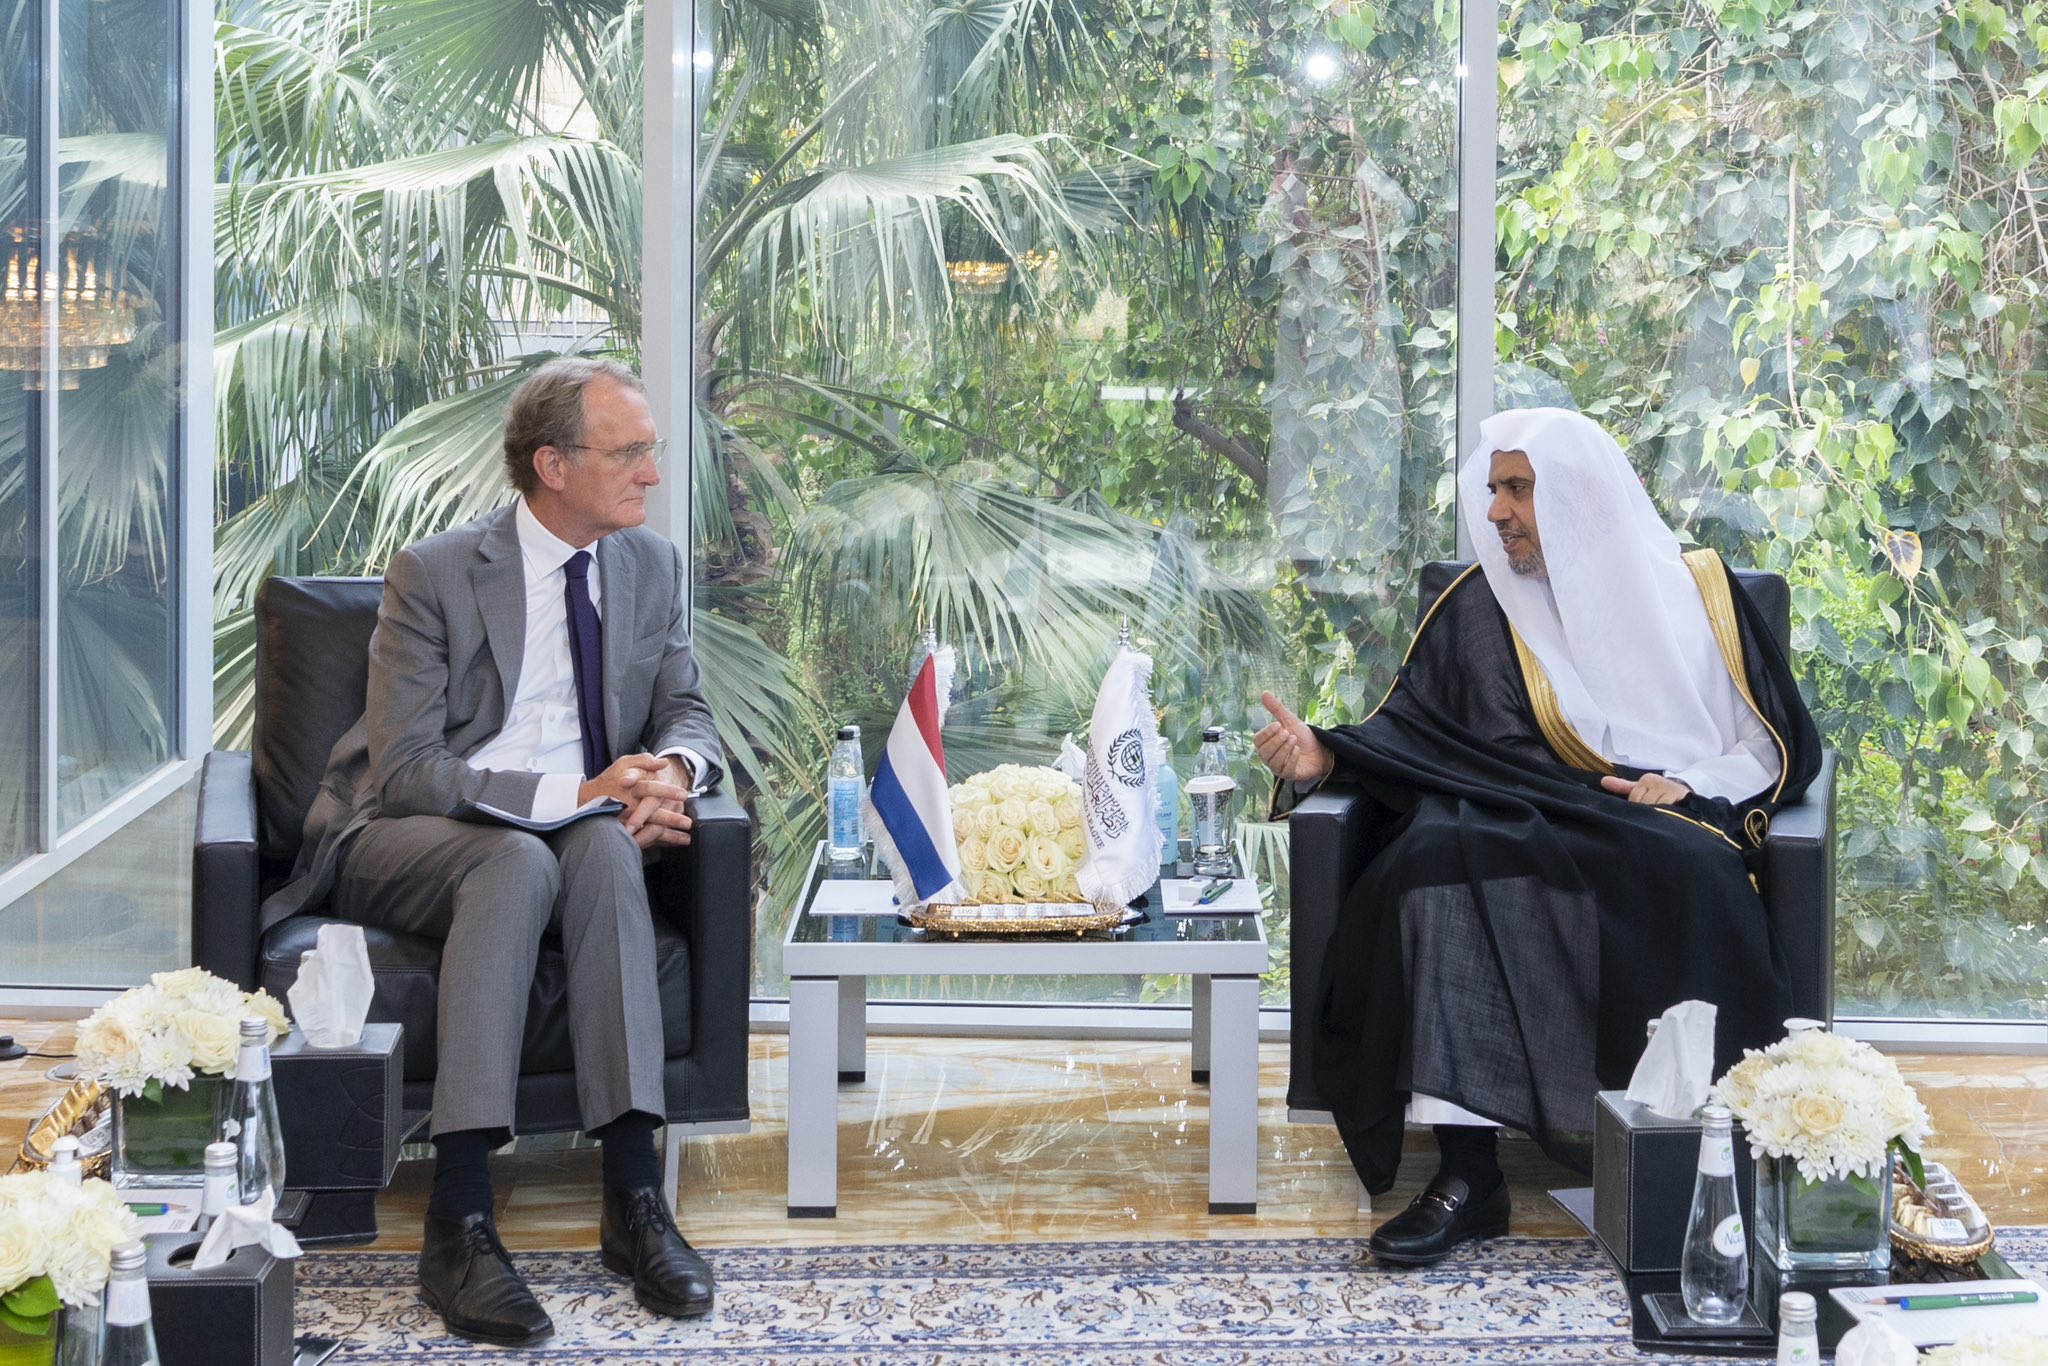 His Excellency Sheikh Dr. Mohammad Al-Issa meets His Excellency Ambassador Jos Douma, the Special Envoy for Religion and Belief for the Netherlands Ministry of Foreign Affairs